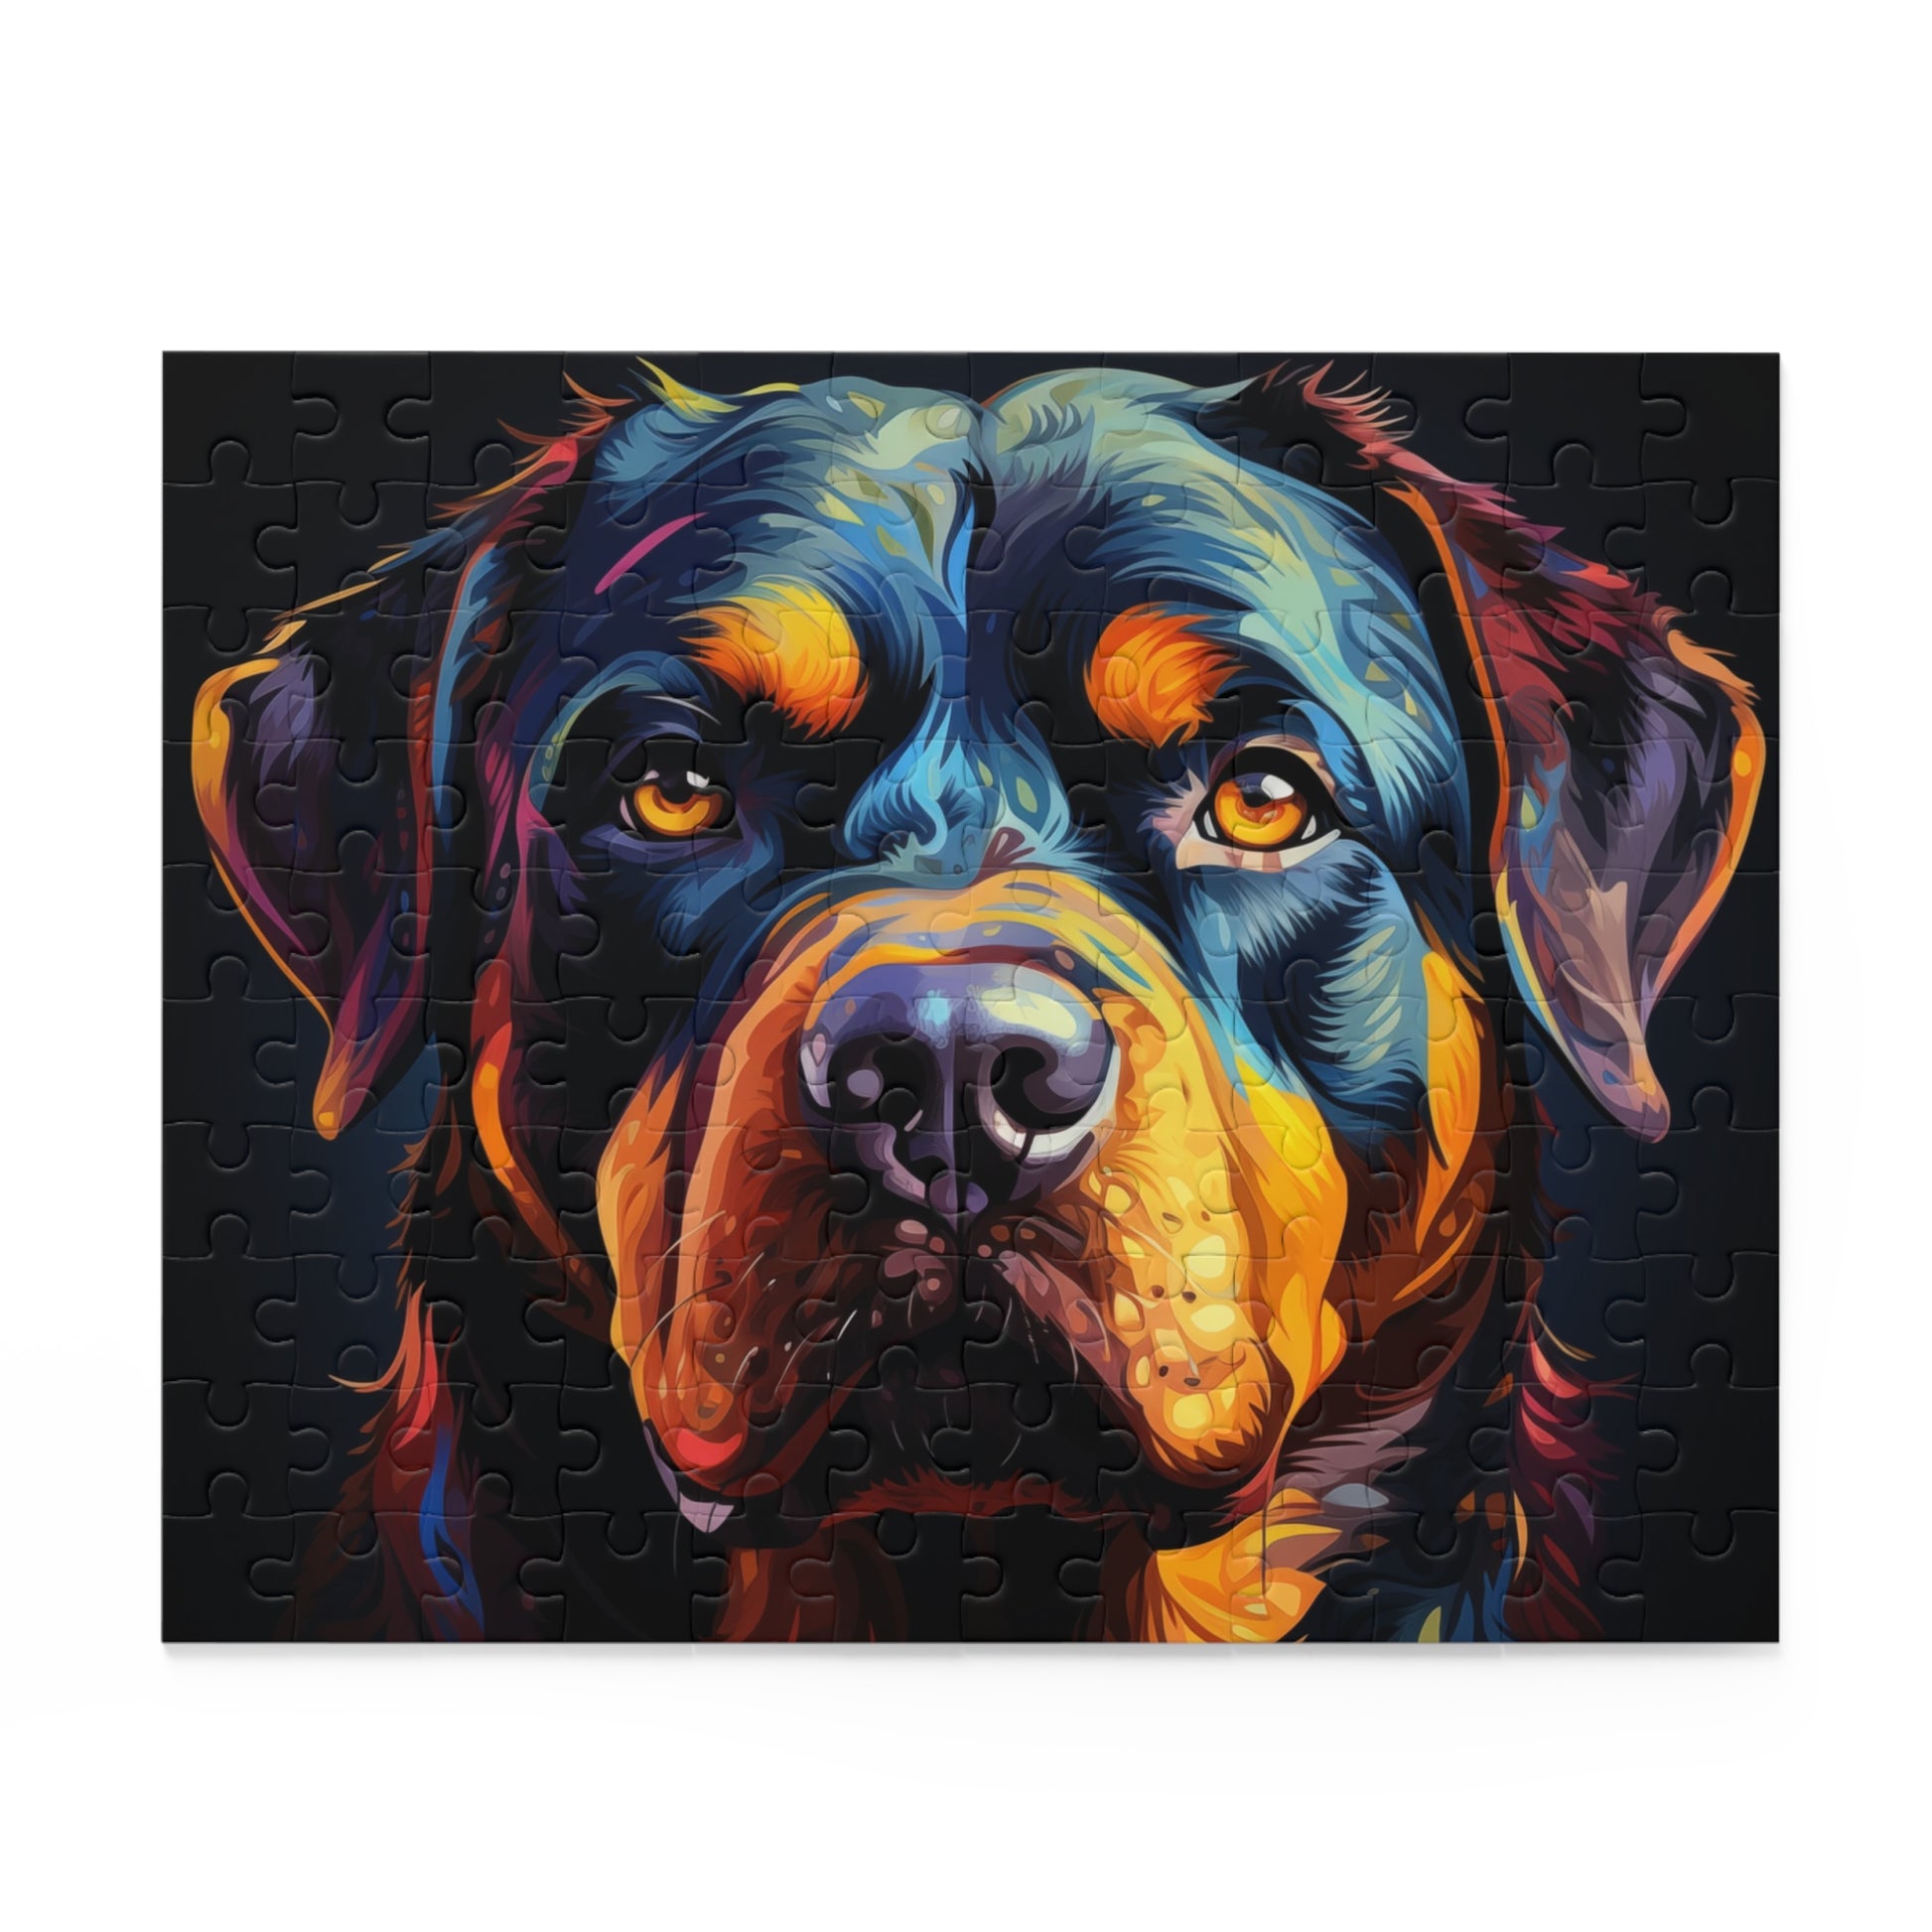 Watercolor Rottweiler Dog Jigsaw Puzzle for Boys, Girls, Kids Adult Birthday Business Jigsaw Puzzle Gift for Him Funny Humorous Indoor Outdoor Game Gift For Her Online-2